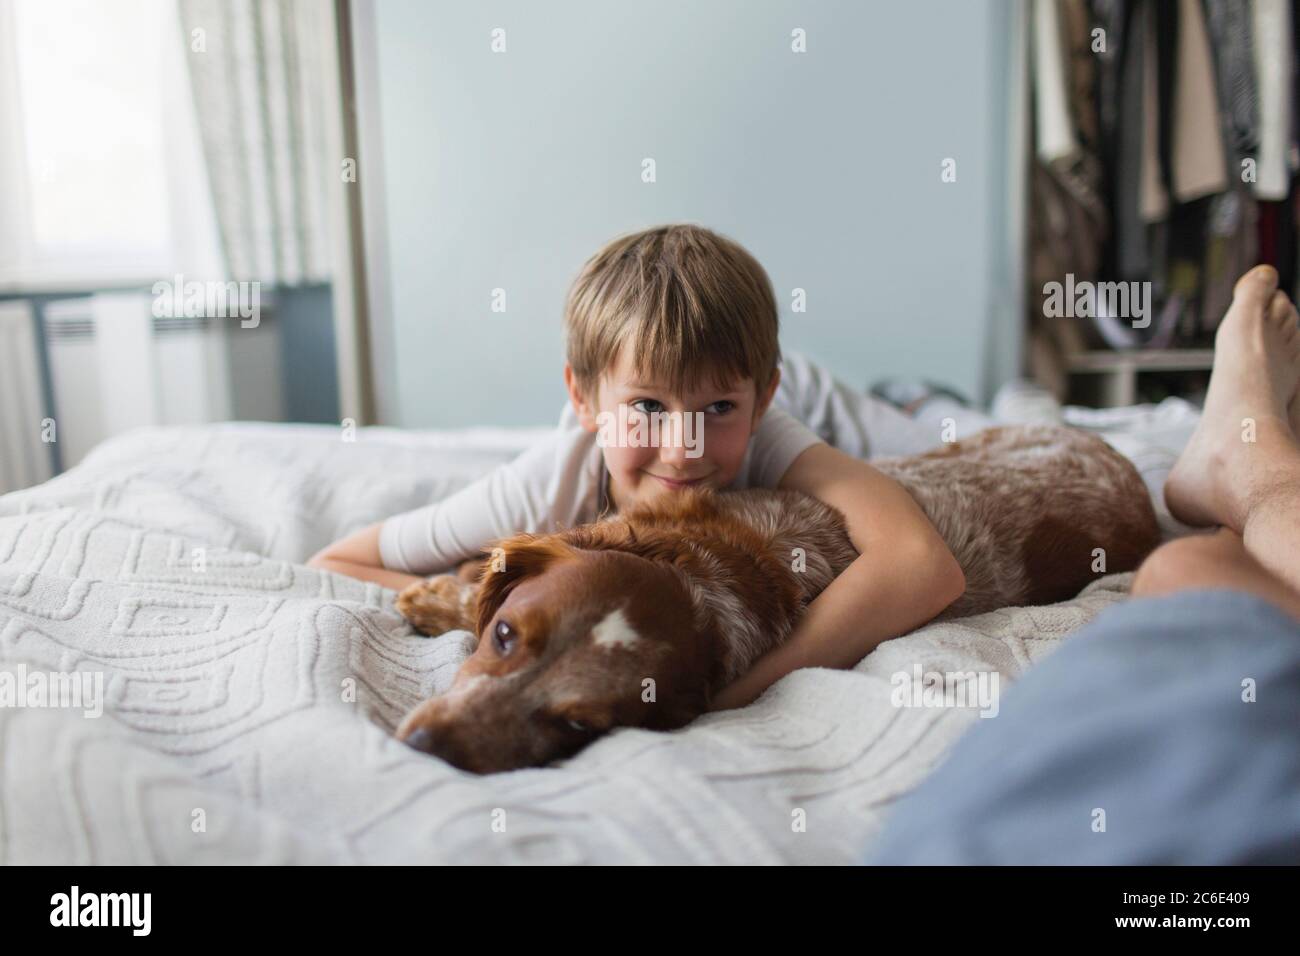 Cute boy cuddling with dog on bed Stock Photo